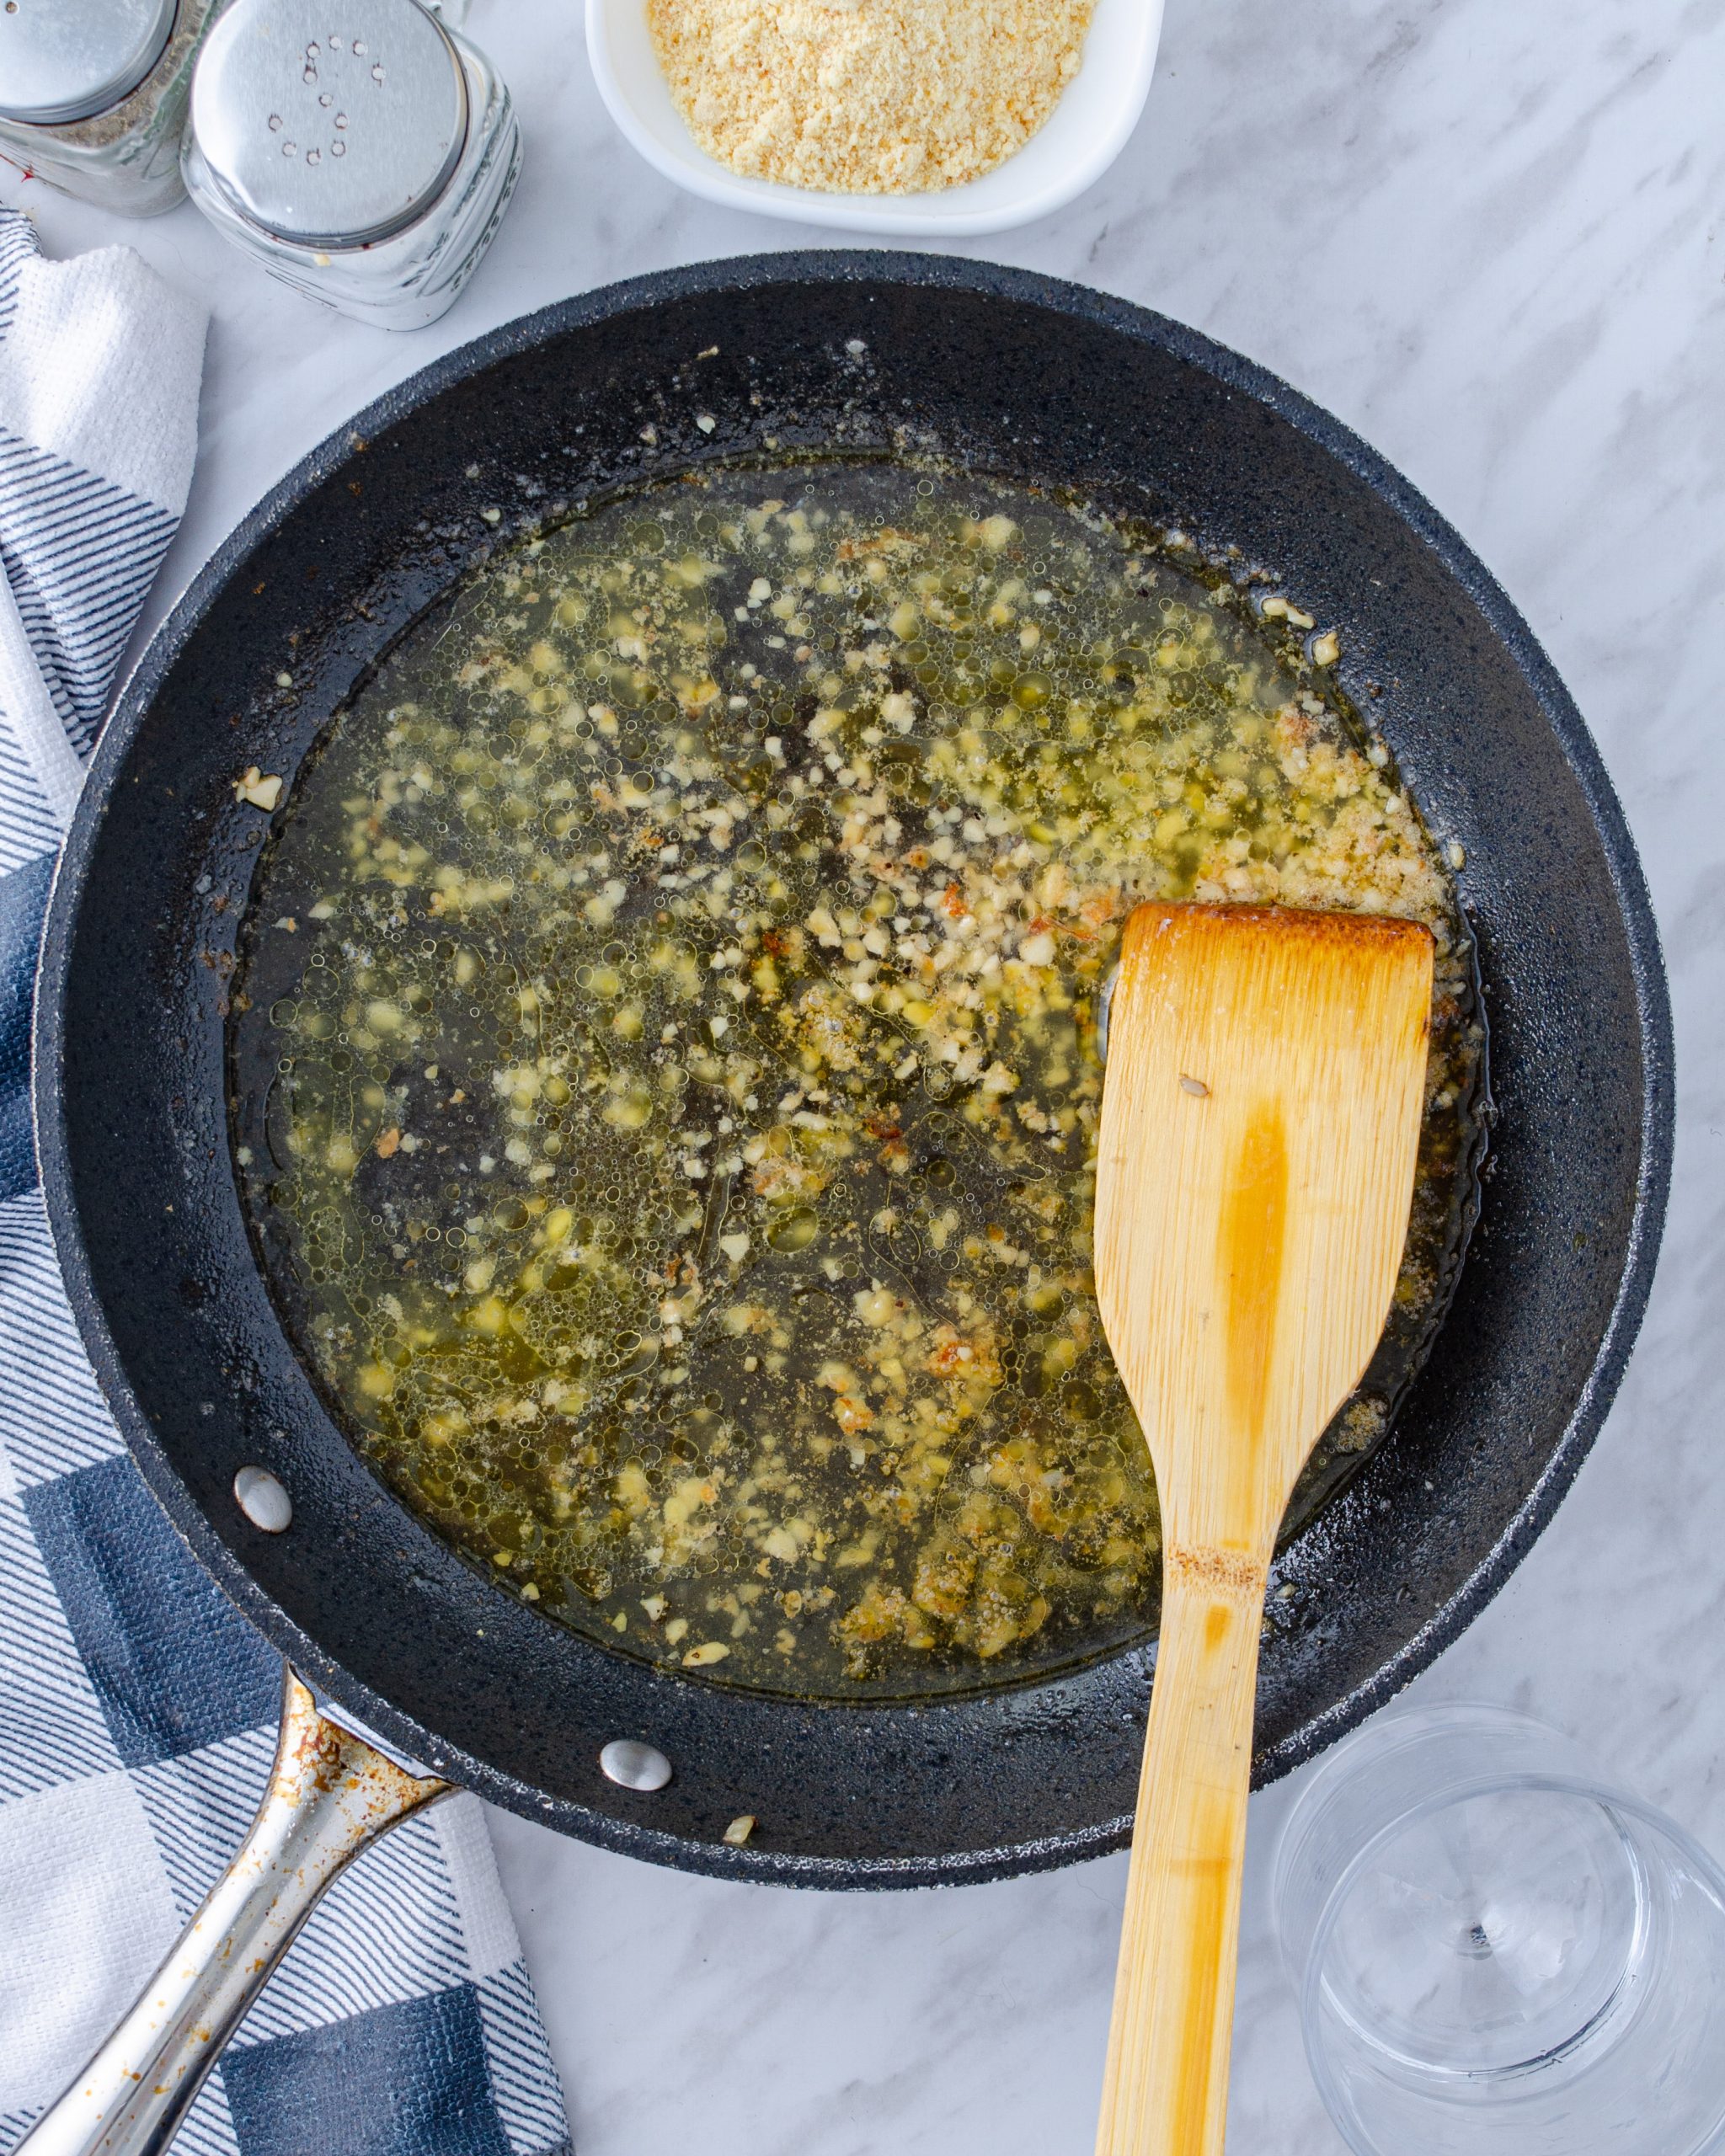 Stir the white cooking wine into the skillet, and simmer until the liquid is reduced by half.